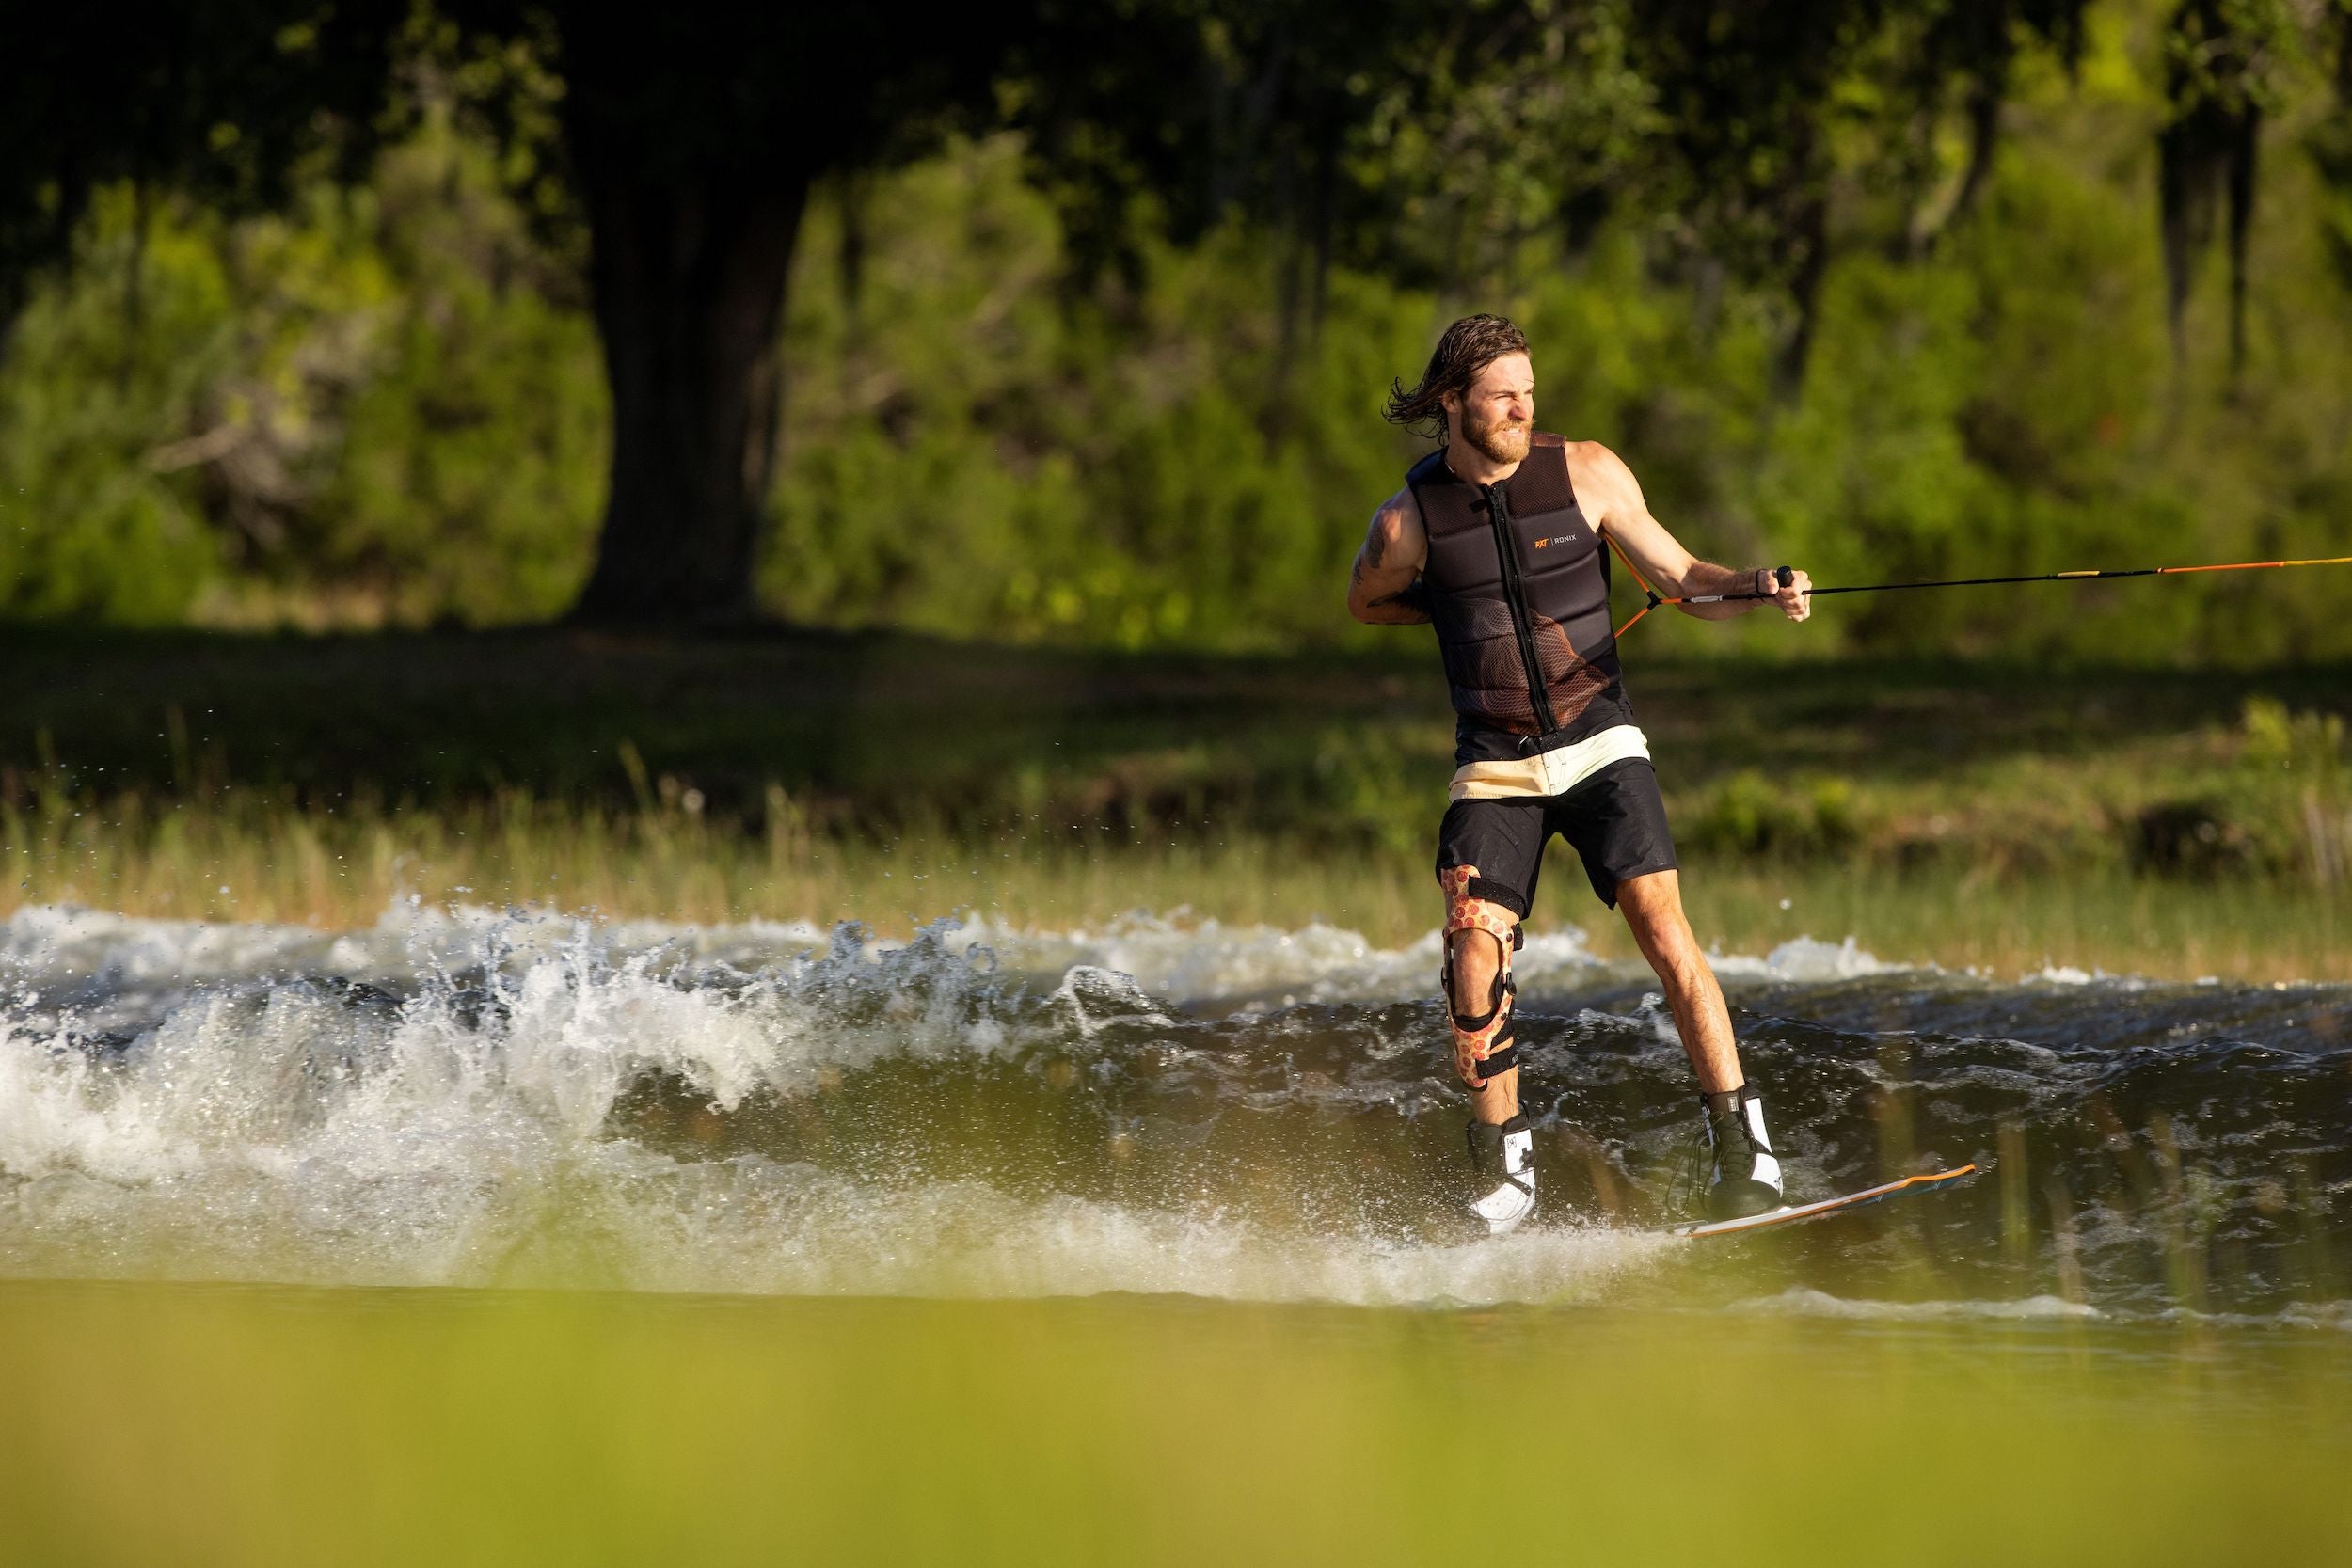 A man is riding a water ski on a lake, wearing Ronix 2023 RXT Boots that offer lightweight flexibility.